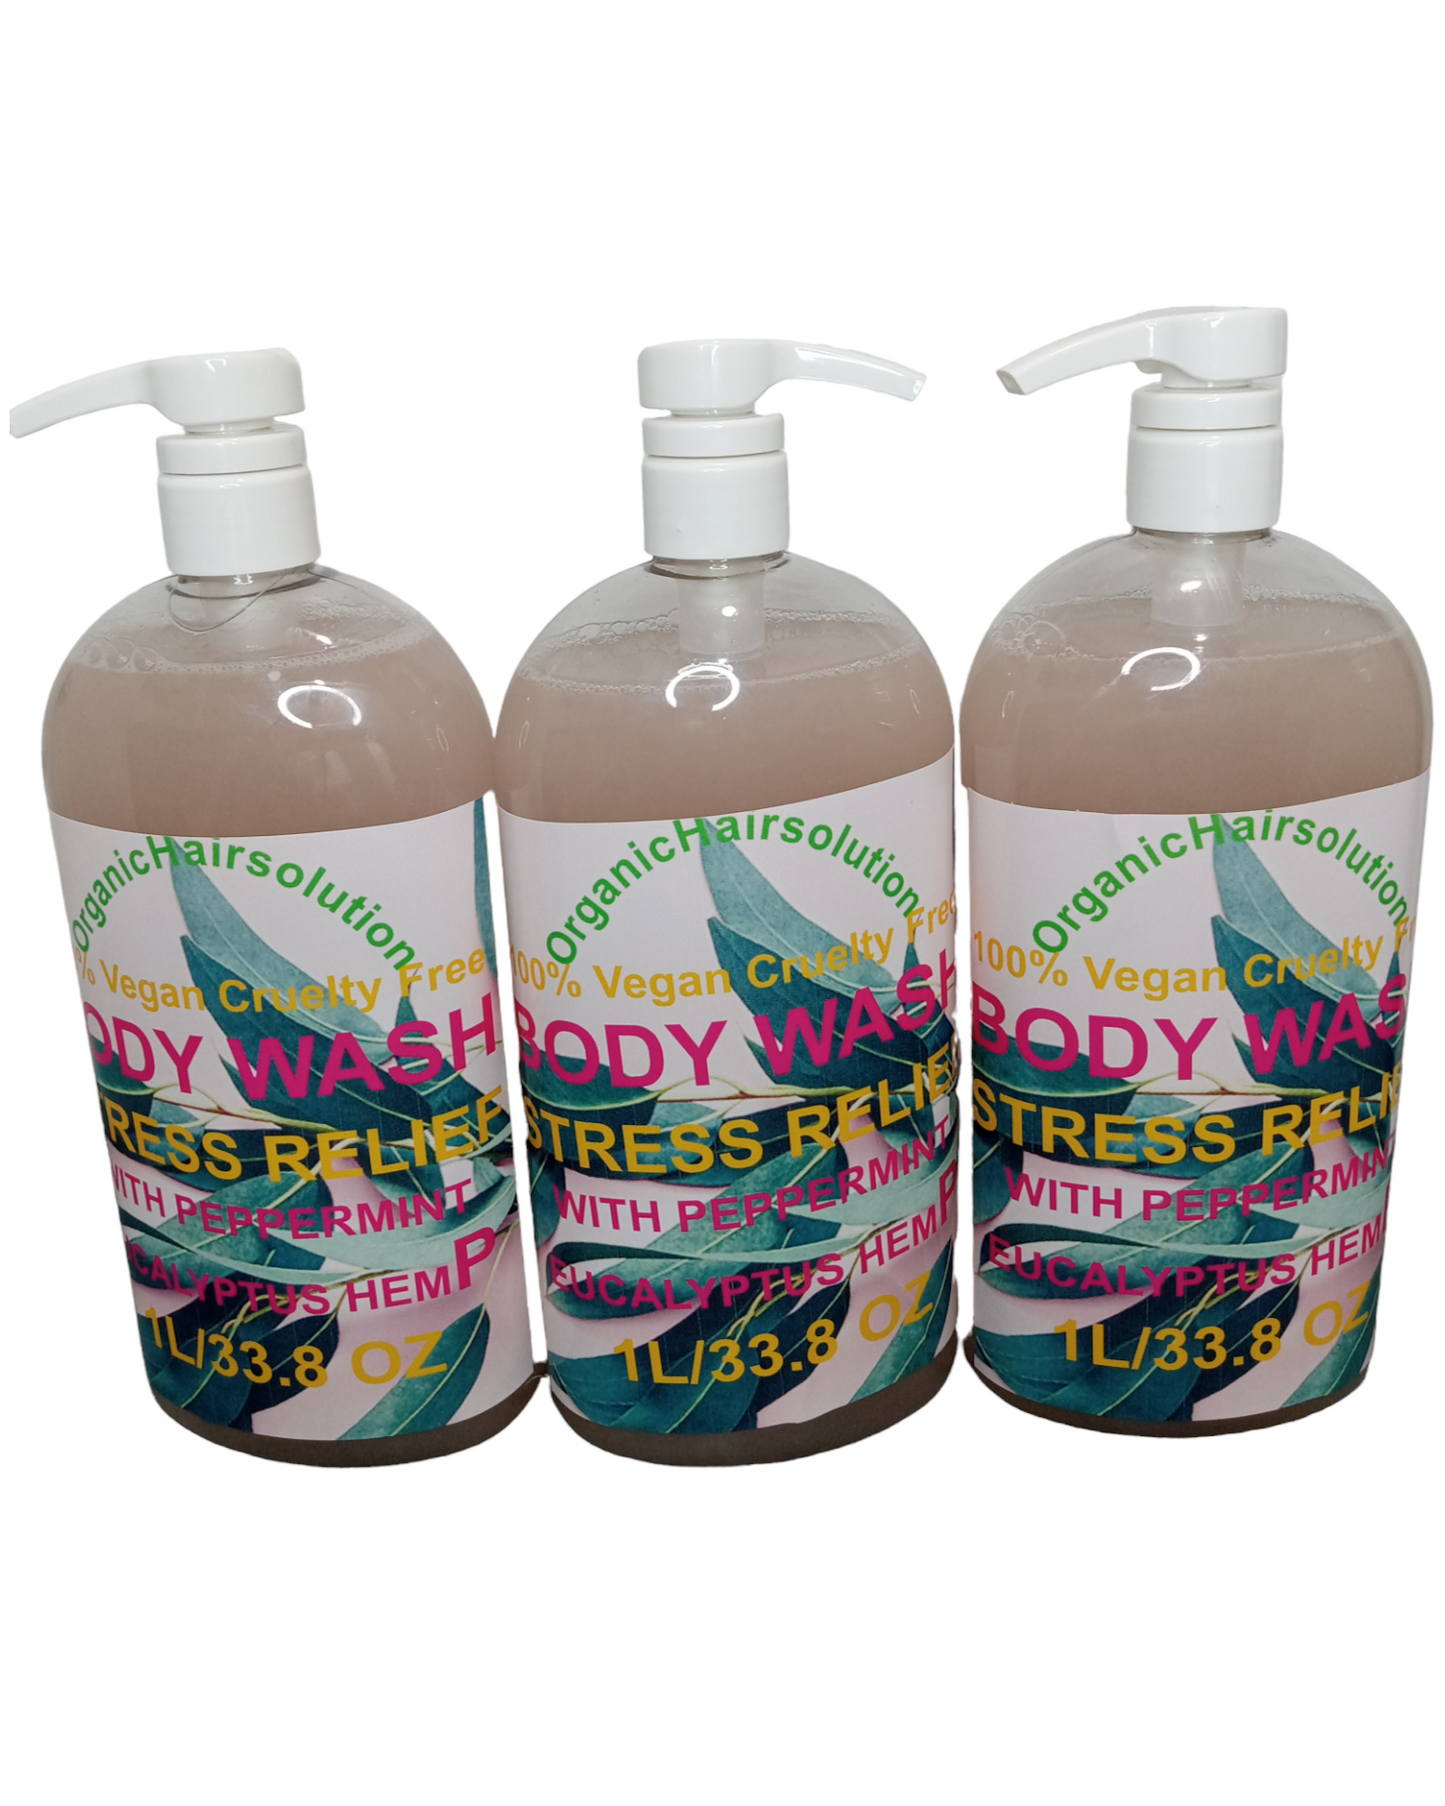 STRESS RELIEF BODY WASH WITH HEMP PEPPERMINT & EUCALYPTUS (Pack of 3 of 1 liter each) - Organic Hair Solution, LLC